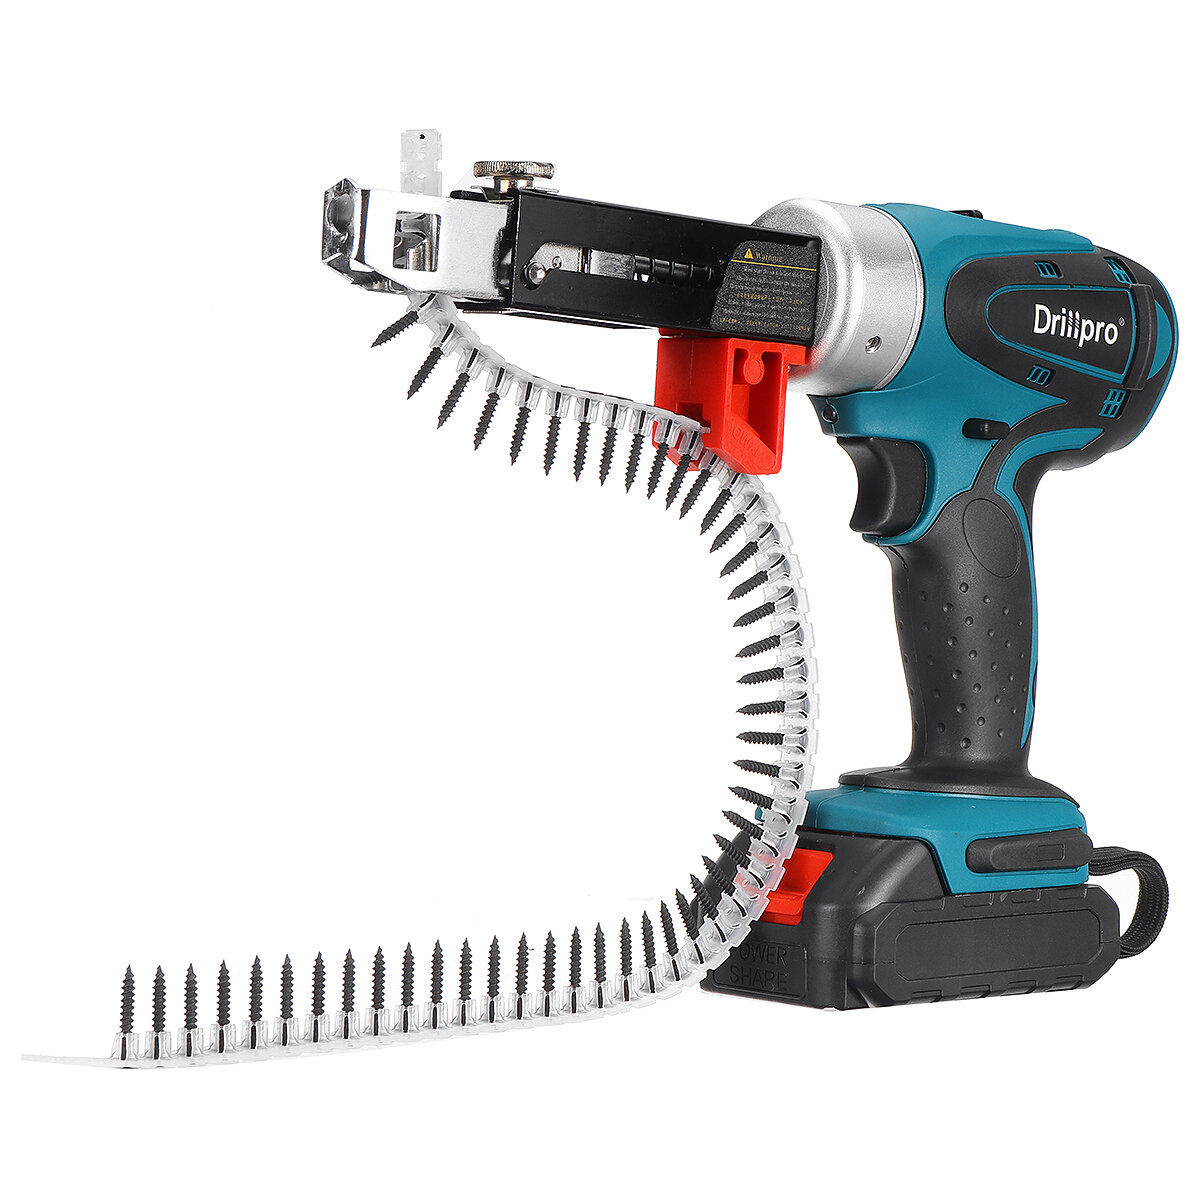 

Drillpro Rechargeable Automatic Electric Nail Guns for Plasterboard Partition Walls Wooden Boards Ceilings W/ 1/2 Batter